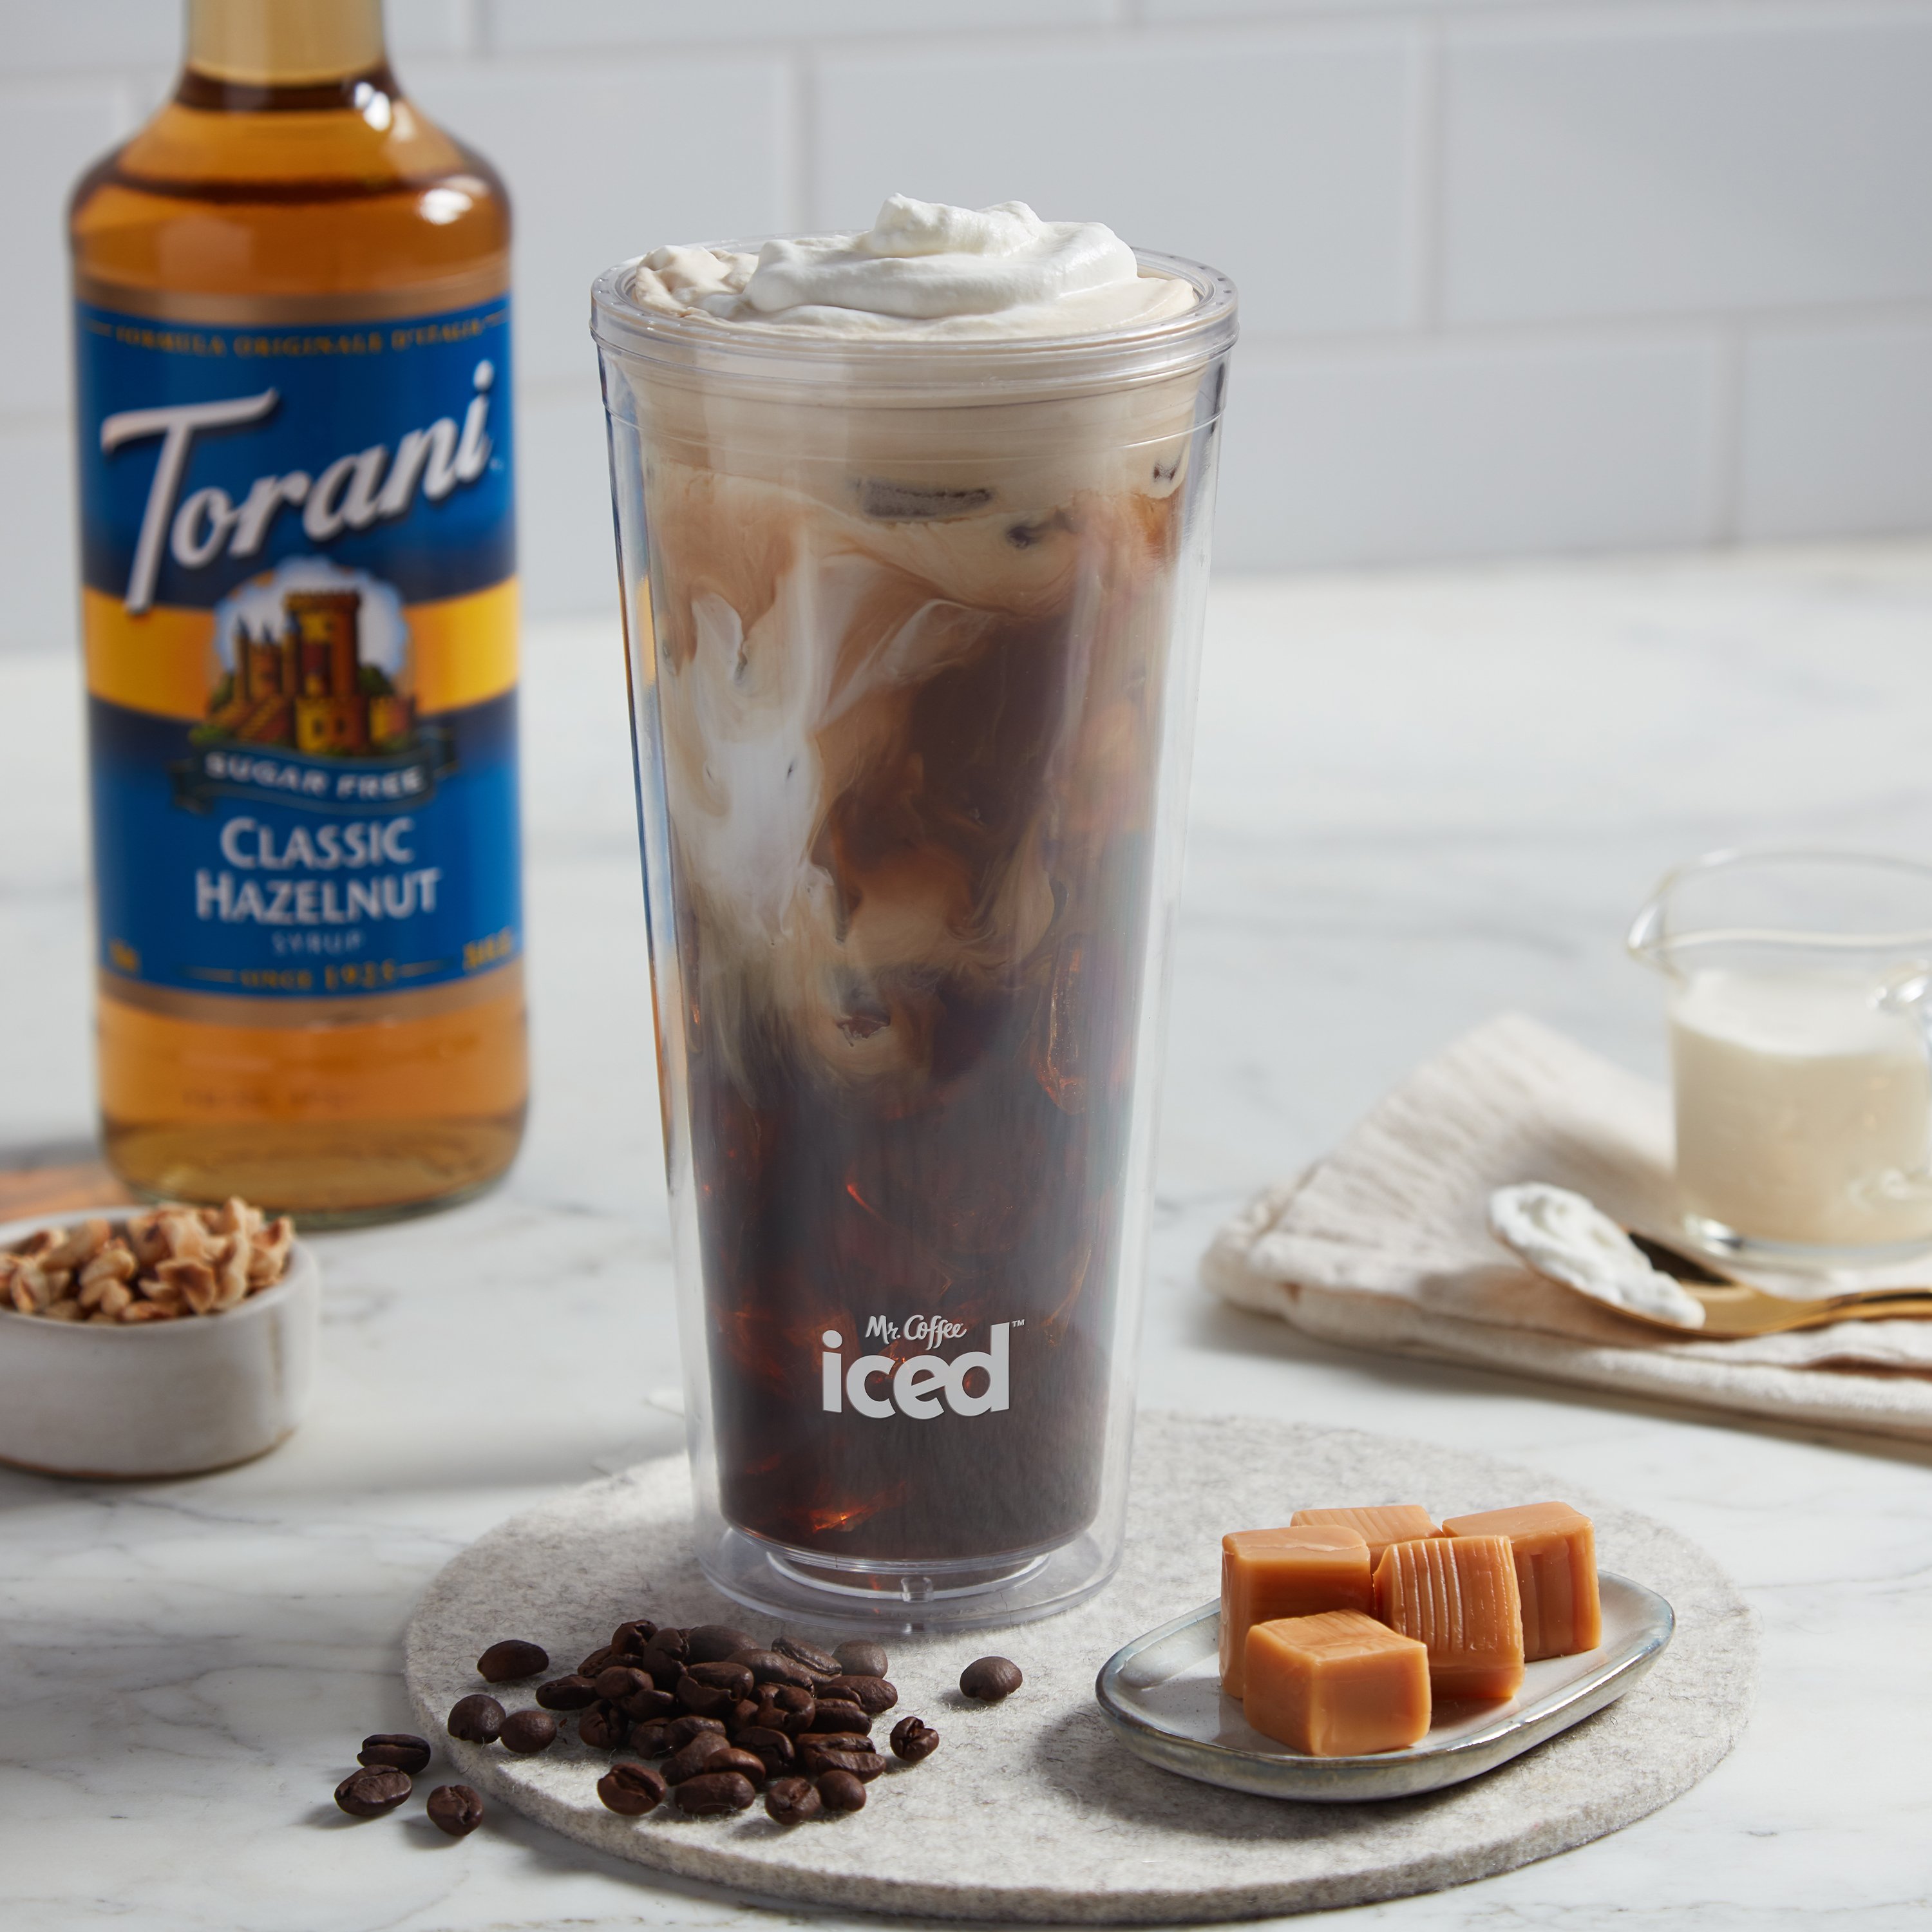 Mr. Coffee® Iced™ Coffee Maker with Reusable Tumbler and Filter